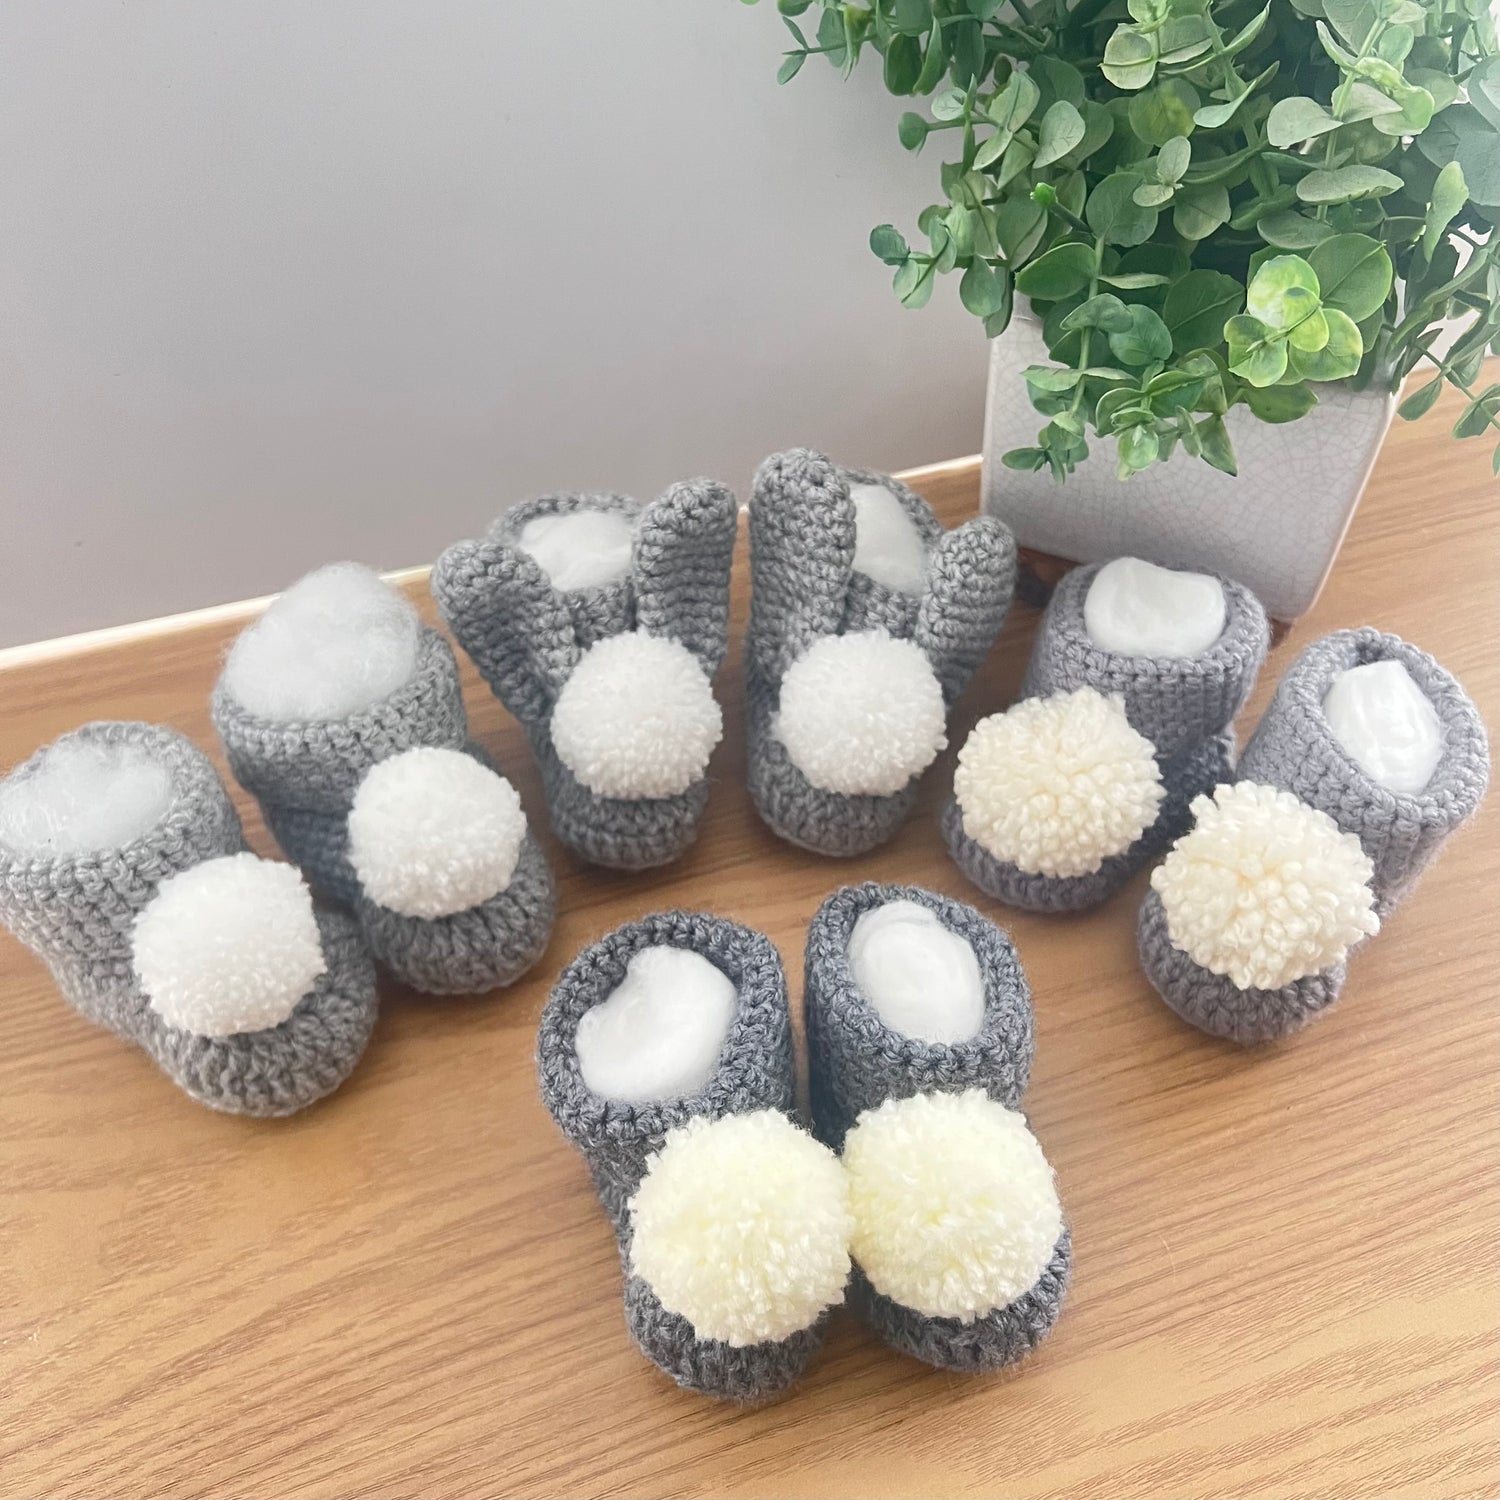 Crocheted baby bootees in grey and white with pom poms